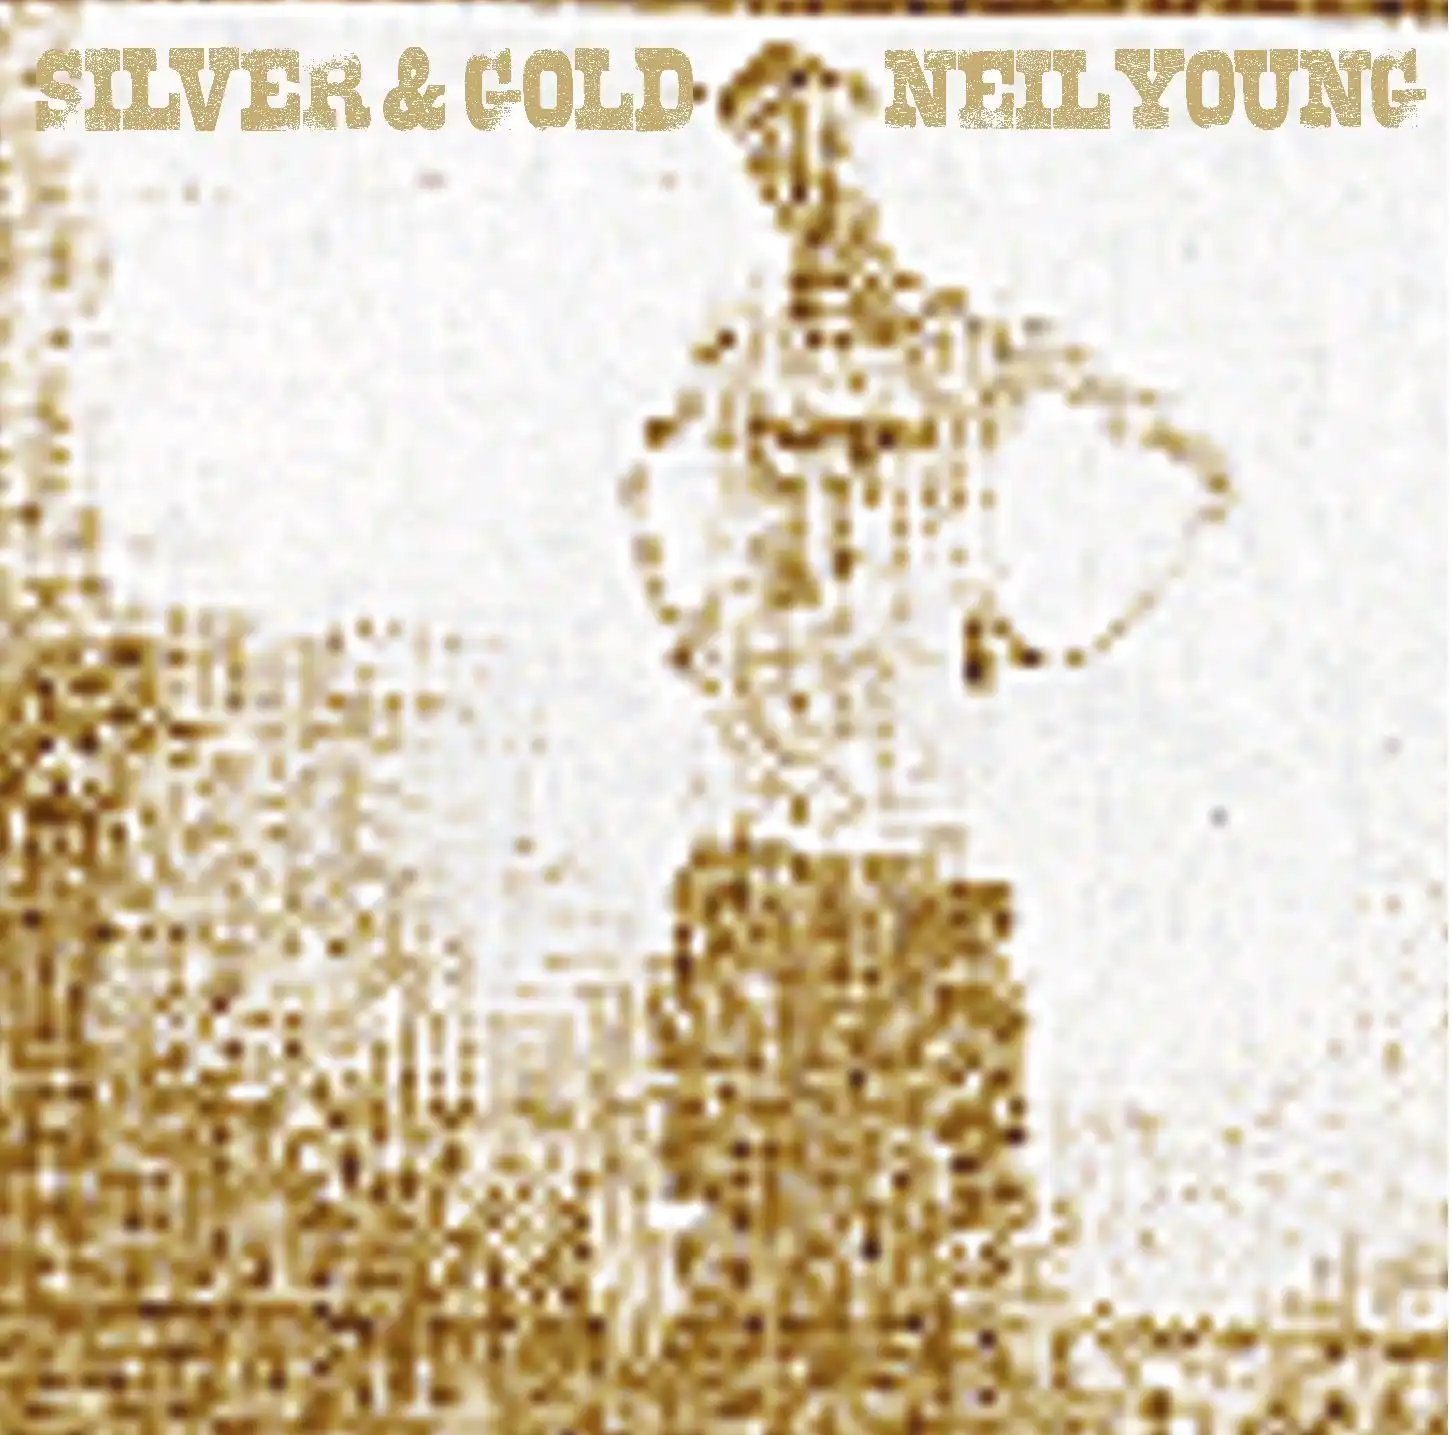 NEIL YOUNG ‎/ SILVER & GOLD のアナログレコードジャケット